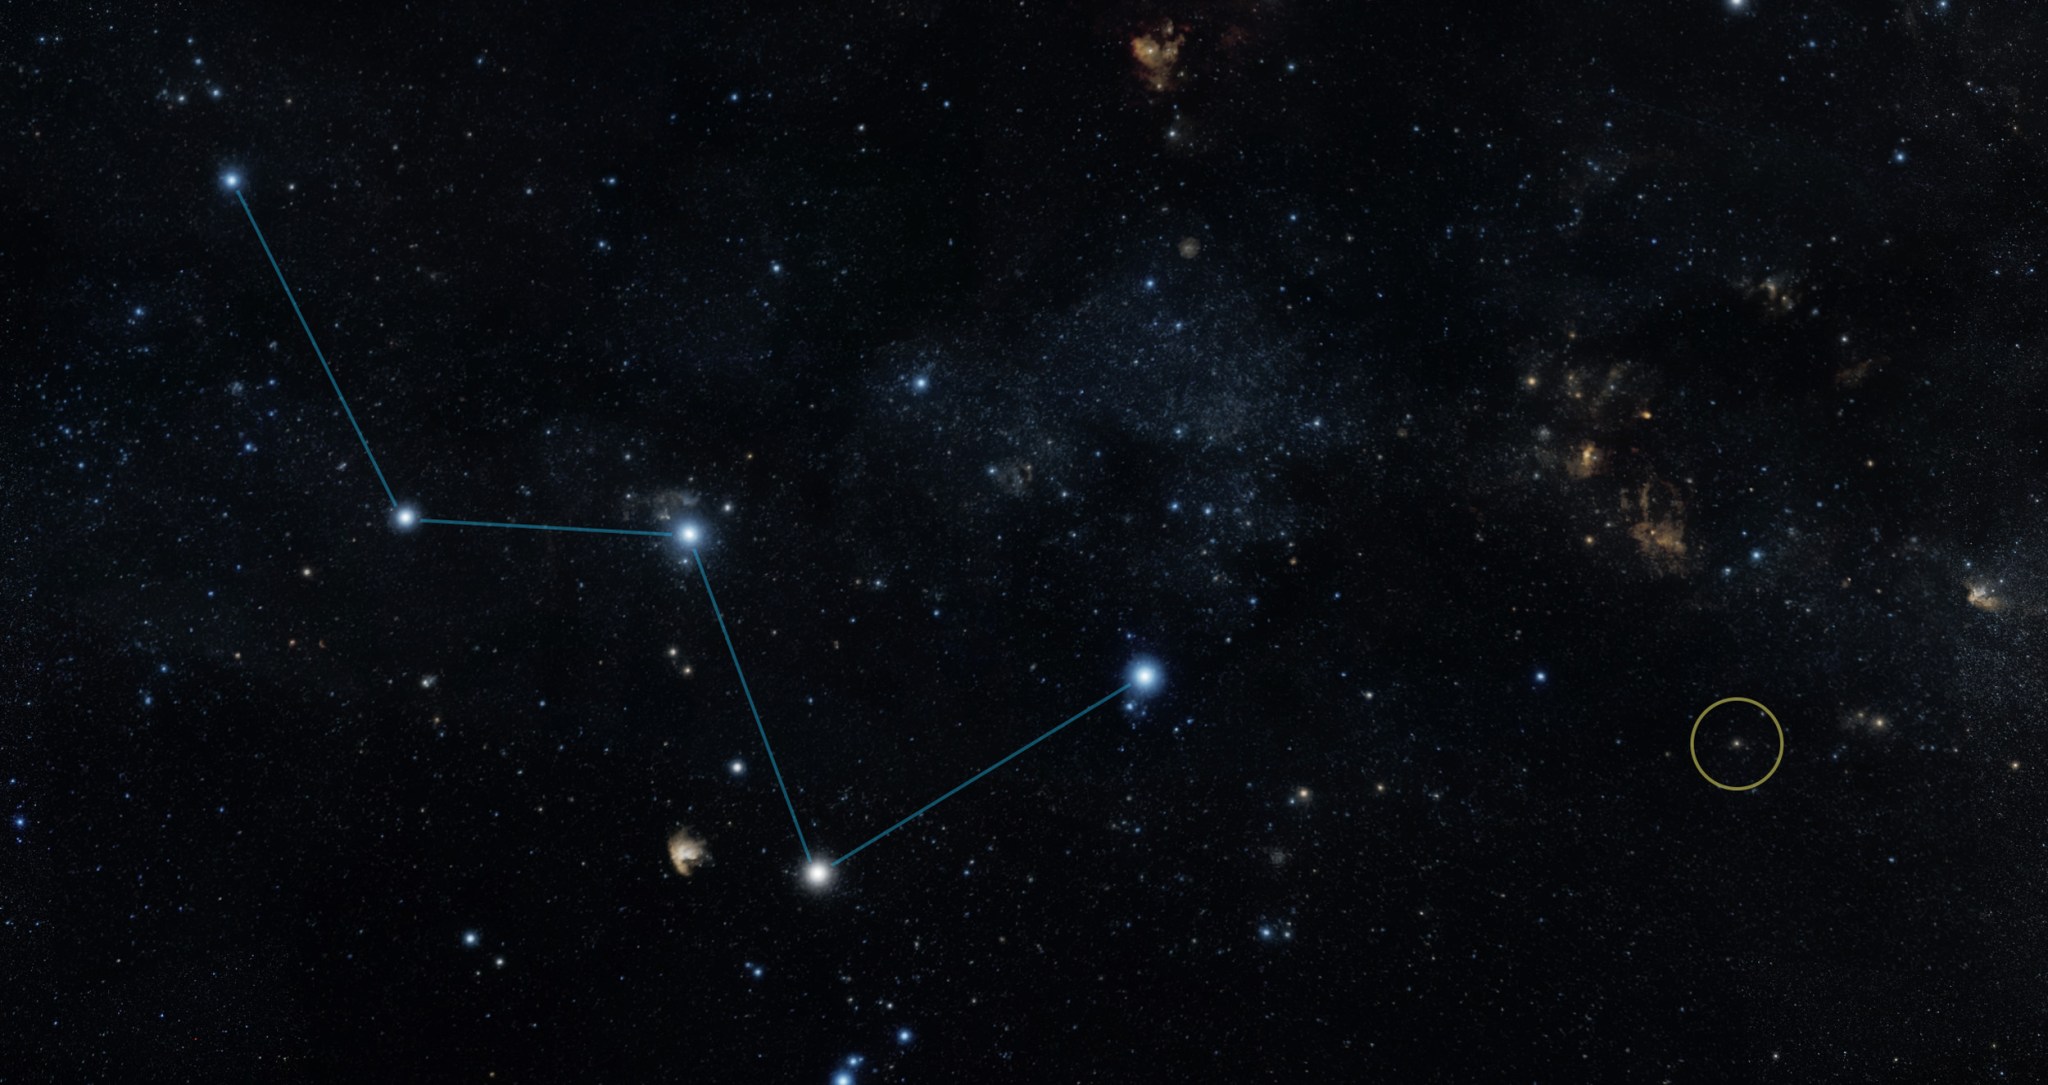 This sky map shows the location of the star HD 219134 (circle)